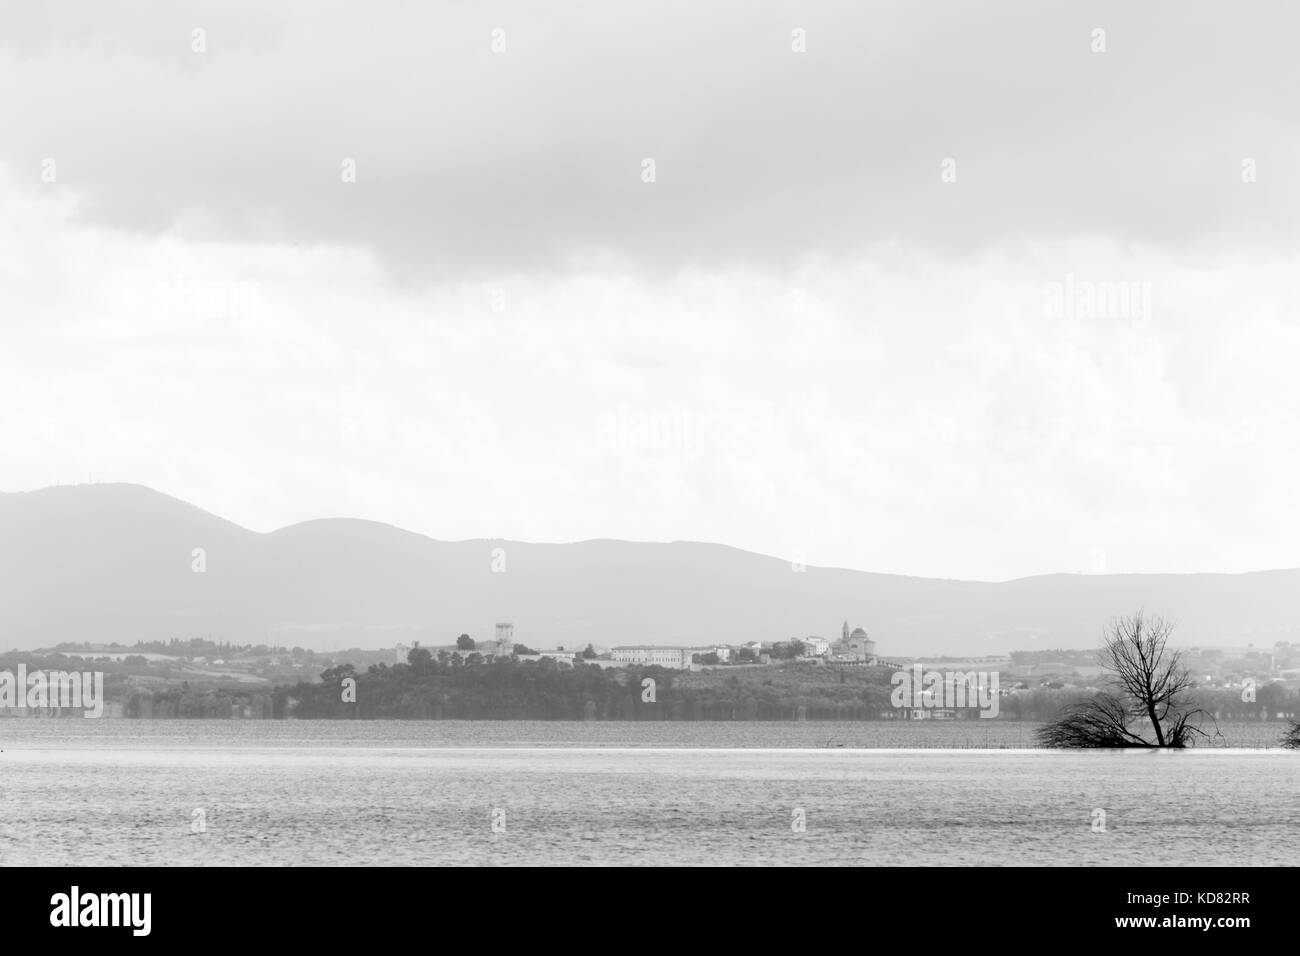 View of Castiglione del Lago town (Umbria, Italy), with Trasimeno lake and trees in the foreground Stock Photo